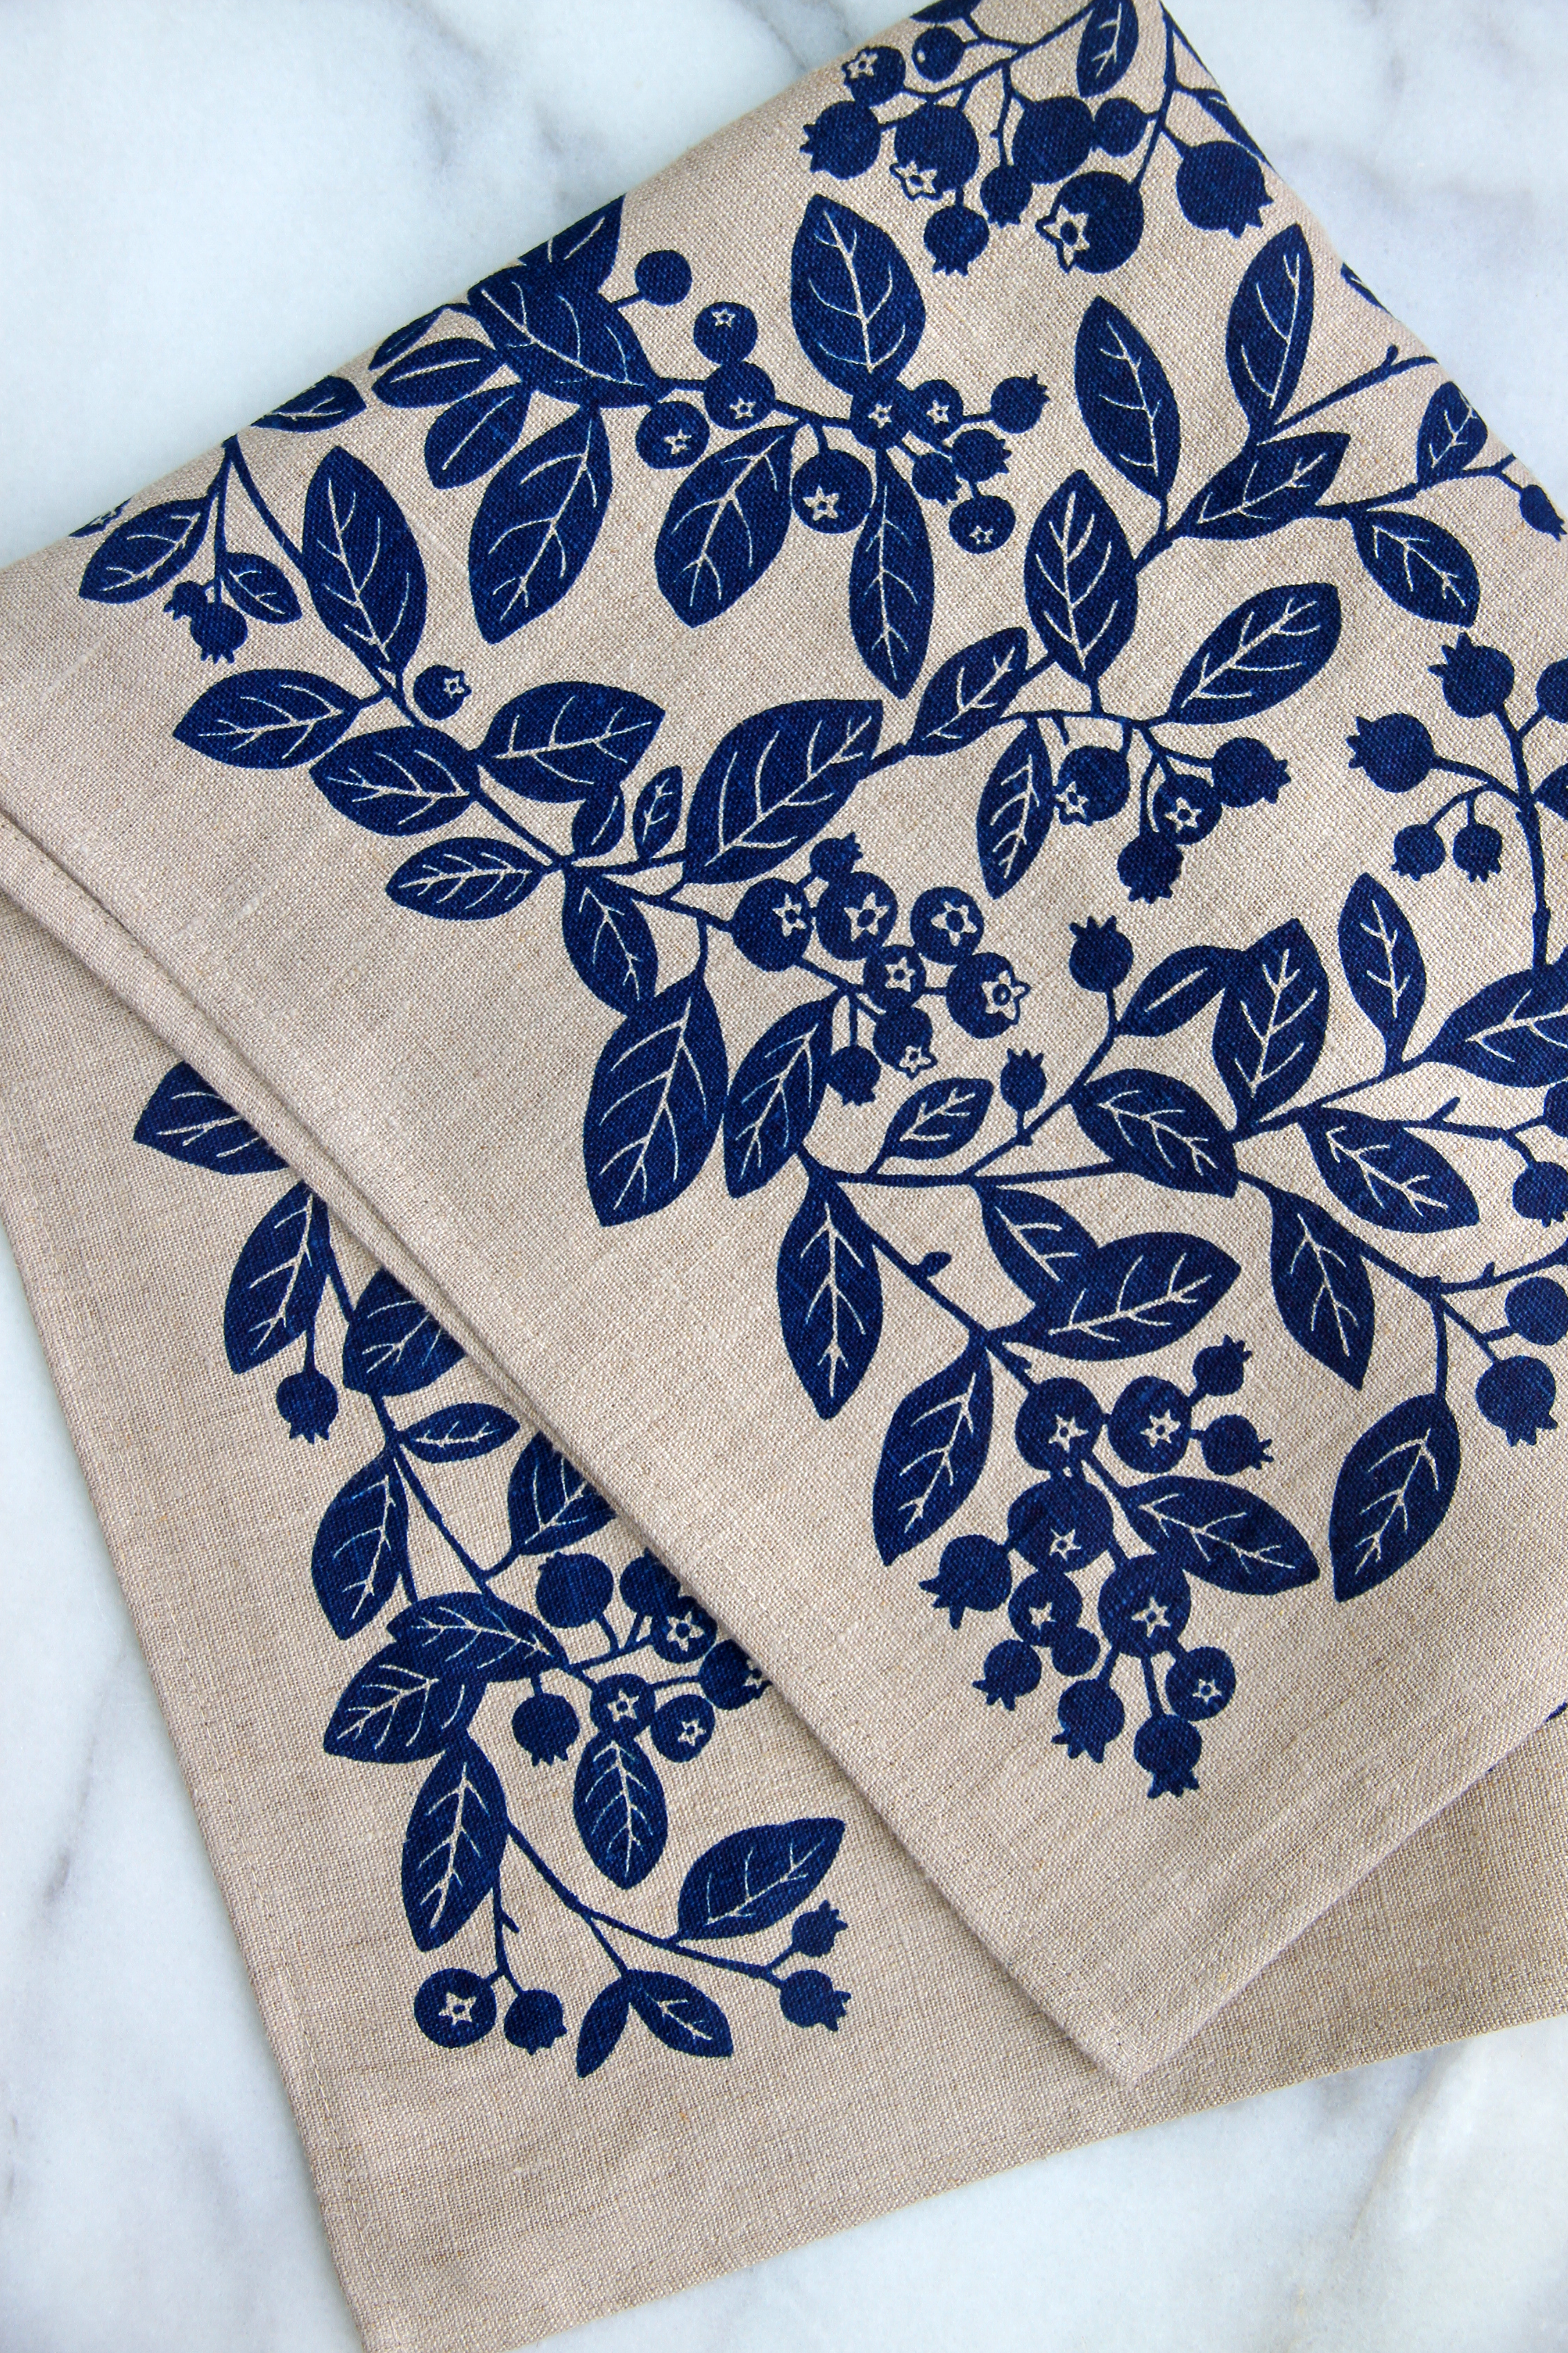 Blueberry Embroidery Tea Towel Set of 2